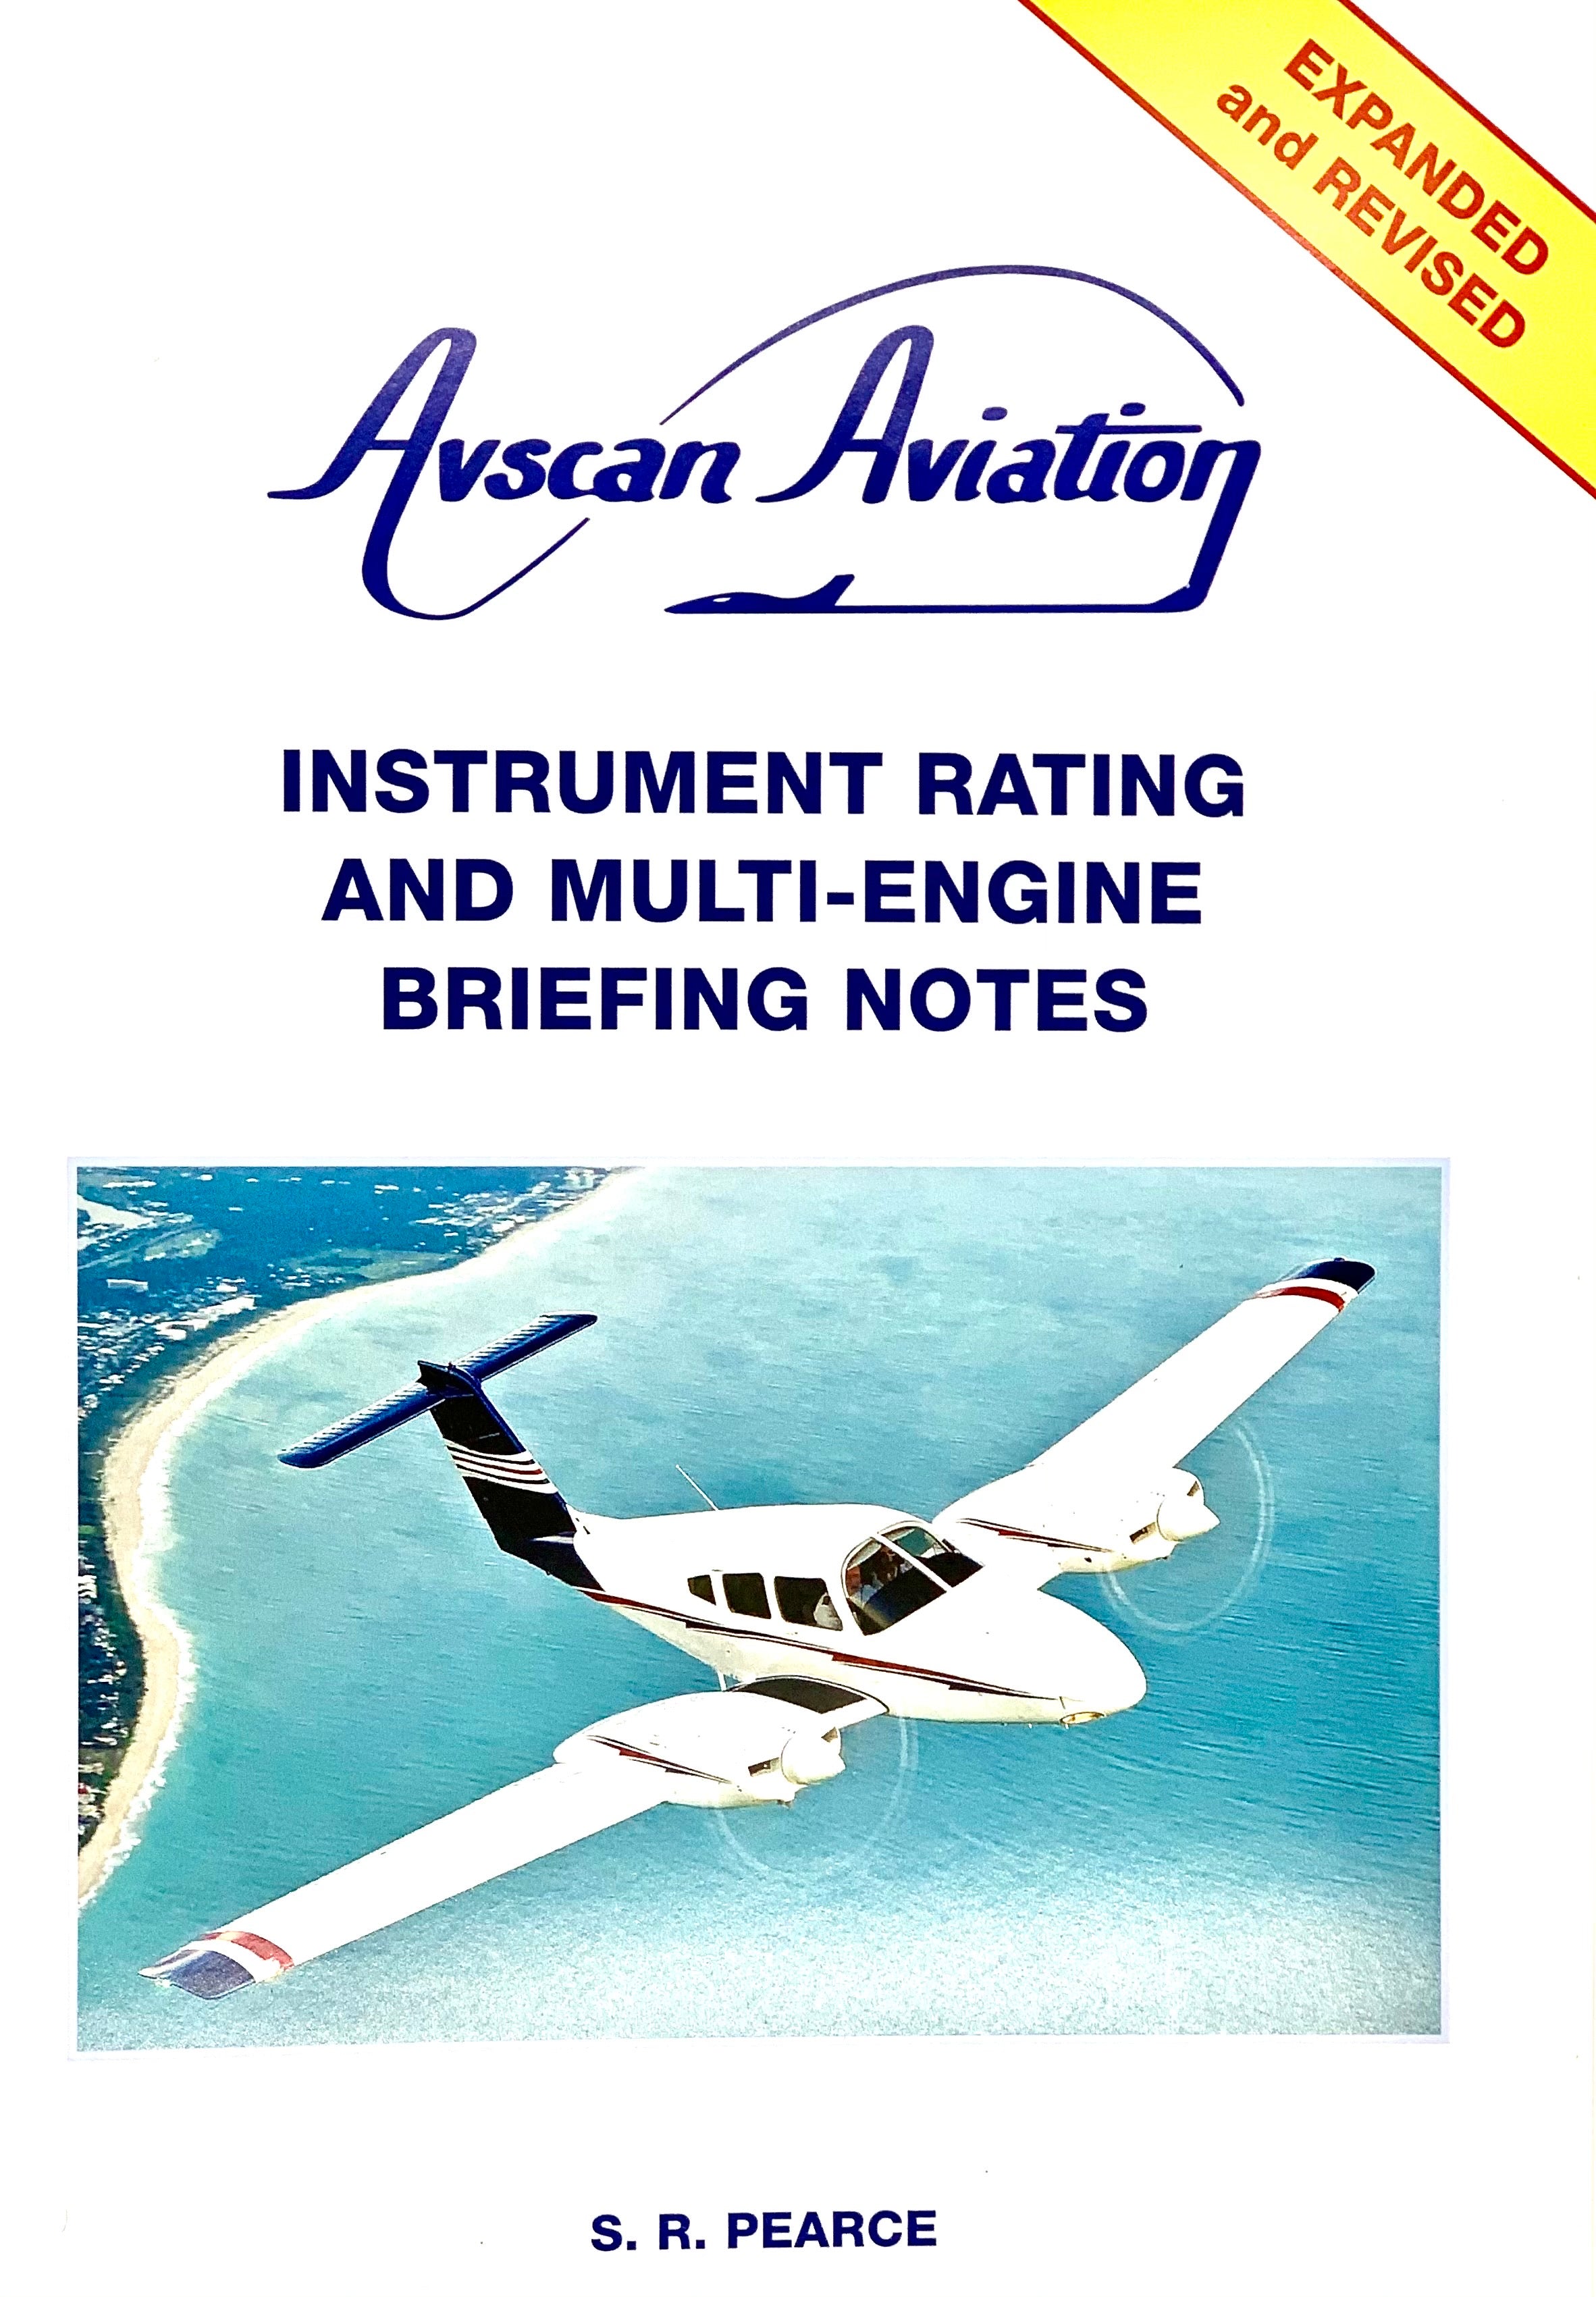 Instrument Rating & Multi-Engine Briefing Notes - by Steve Pearce